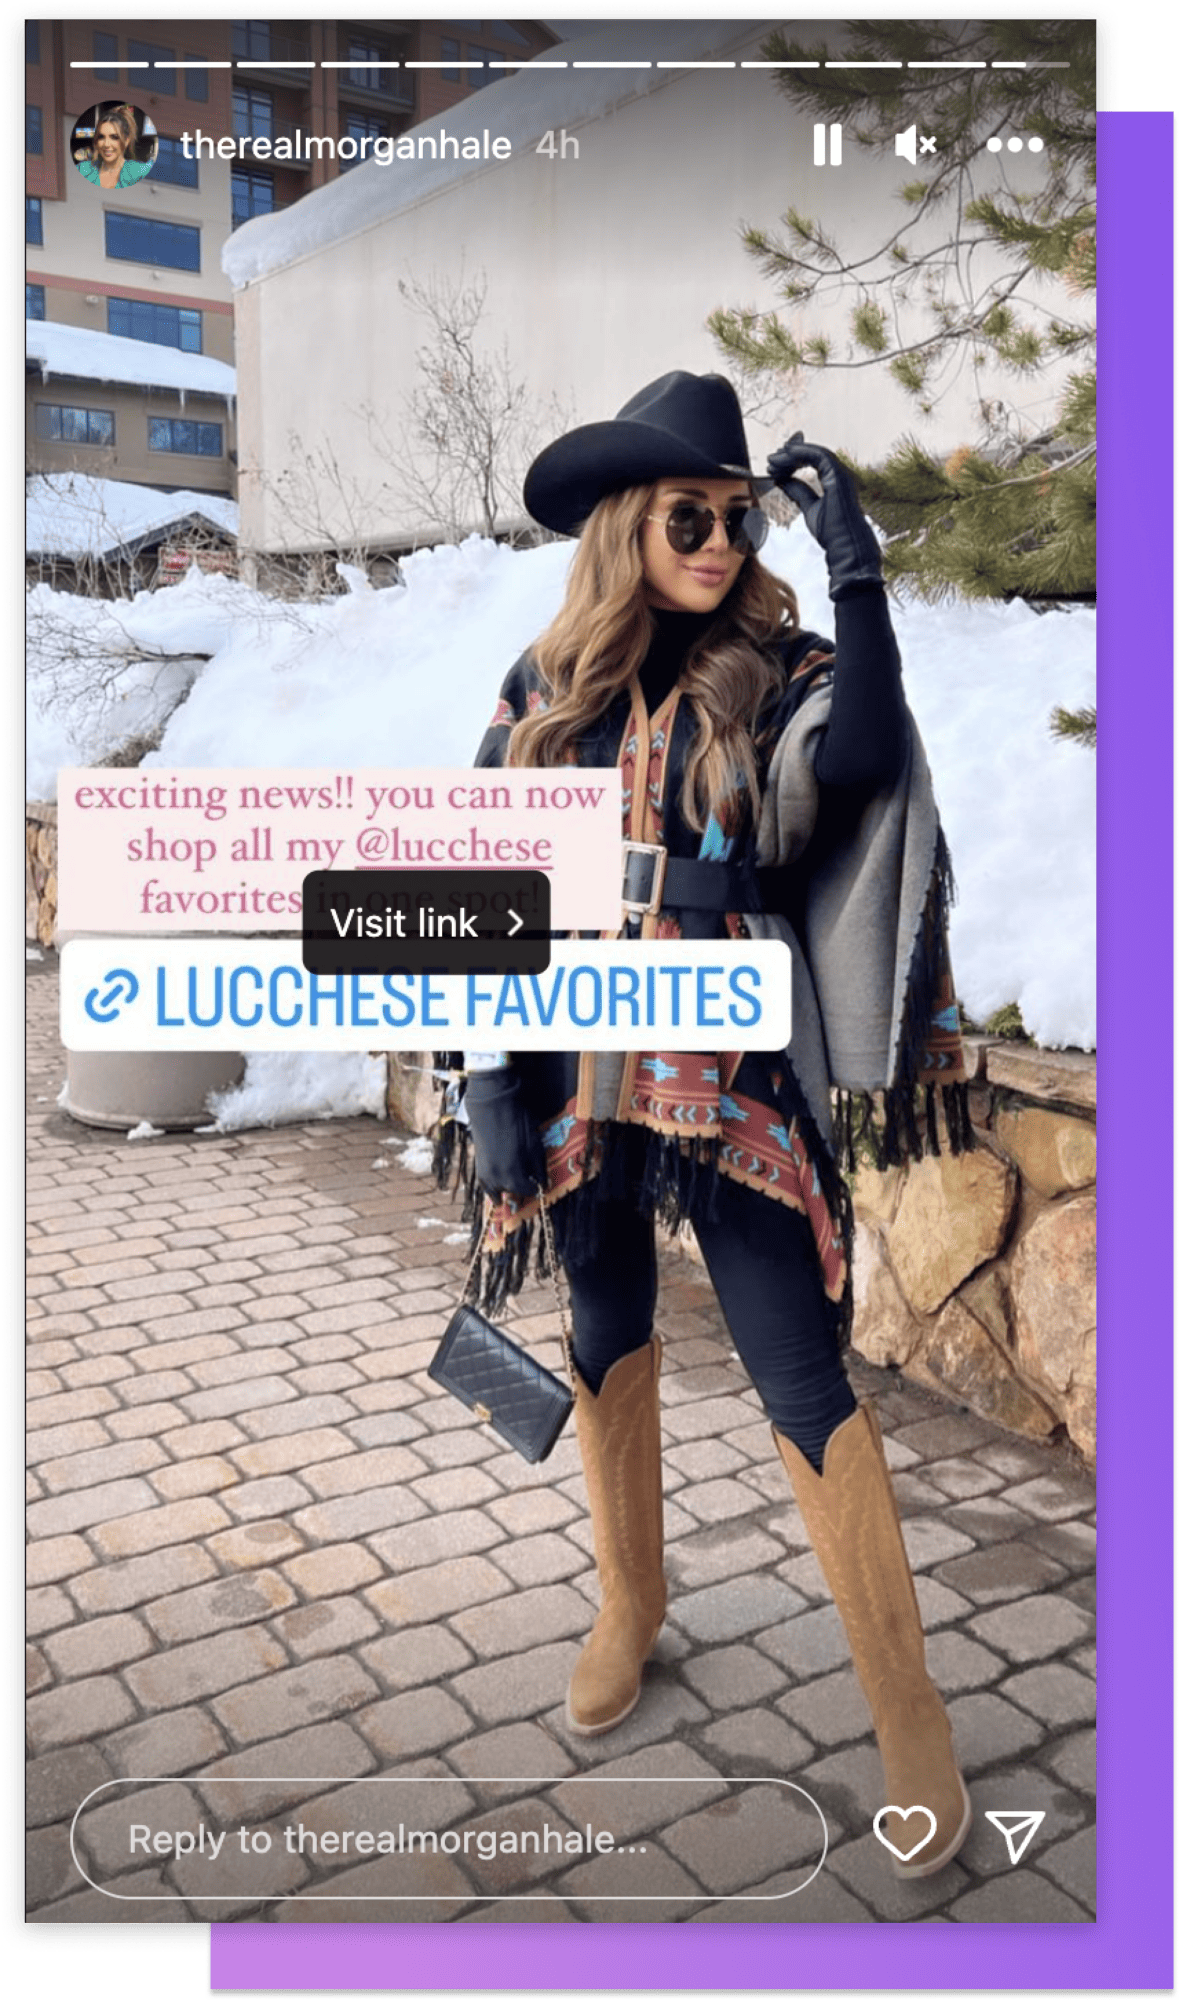 Lucchese Influencer links to her Storefront with excitement on her Instagram story